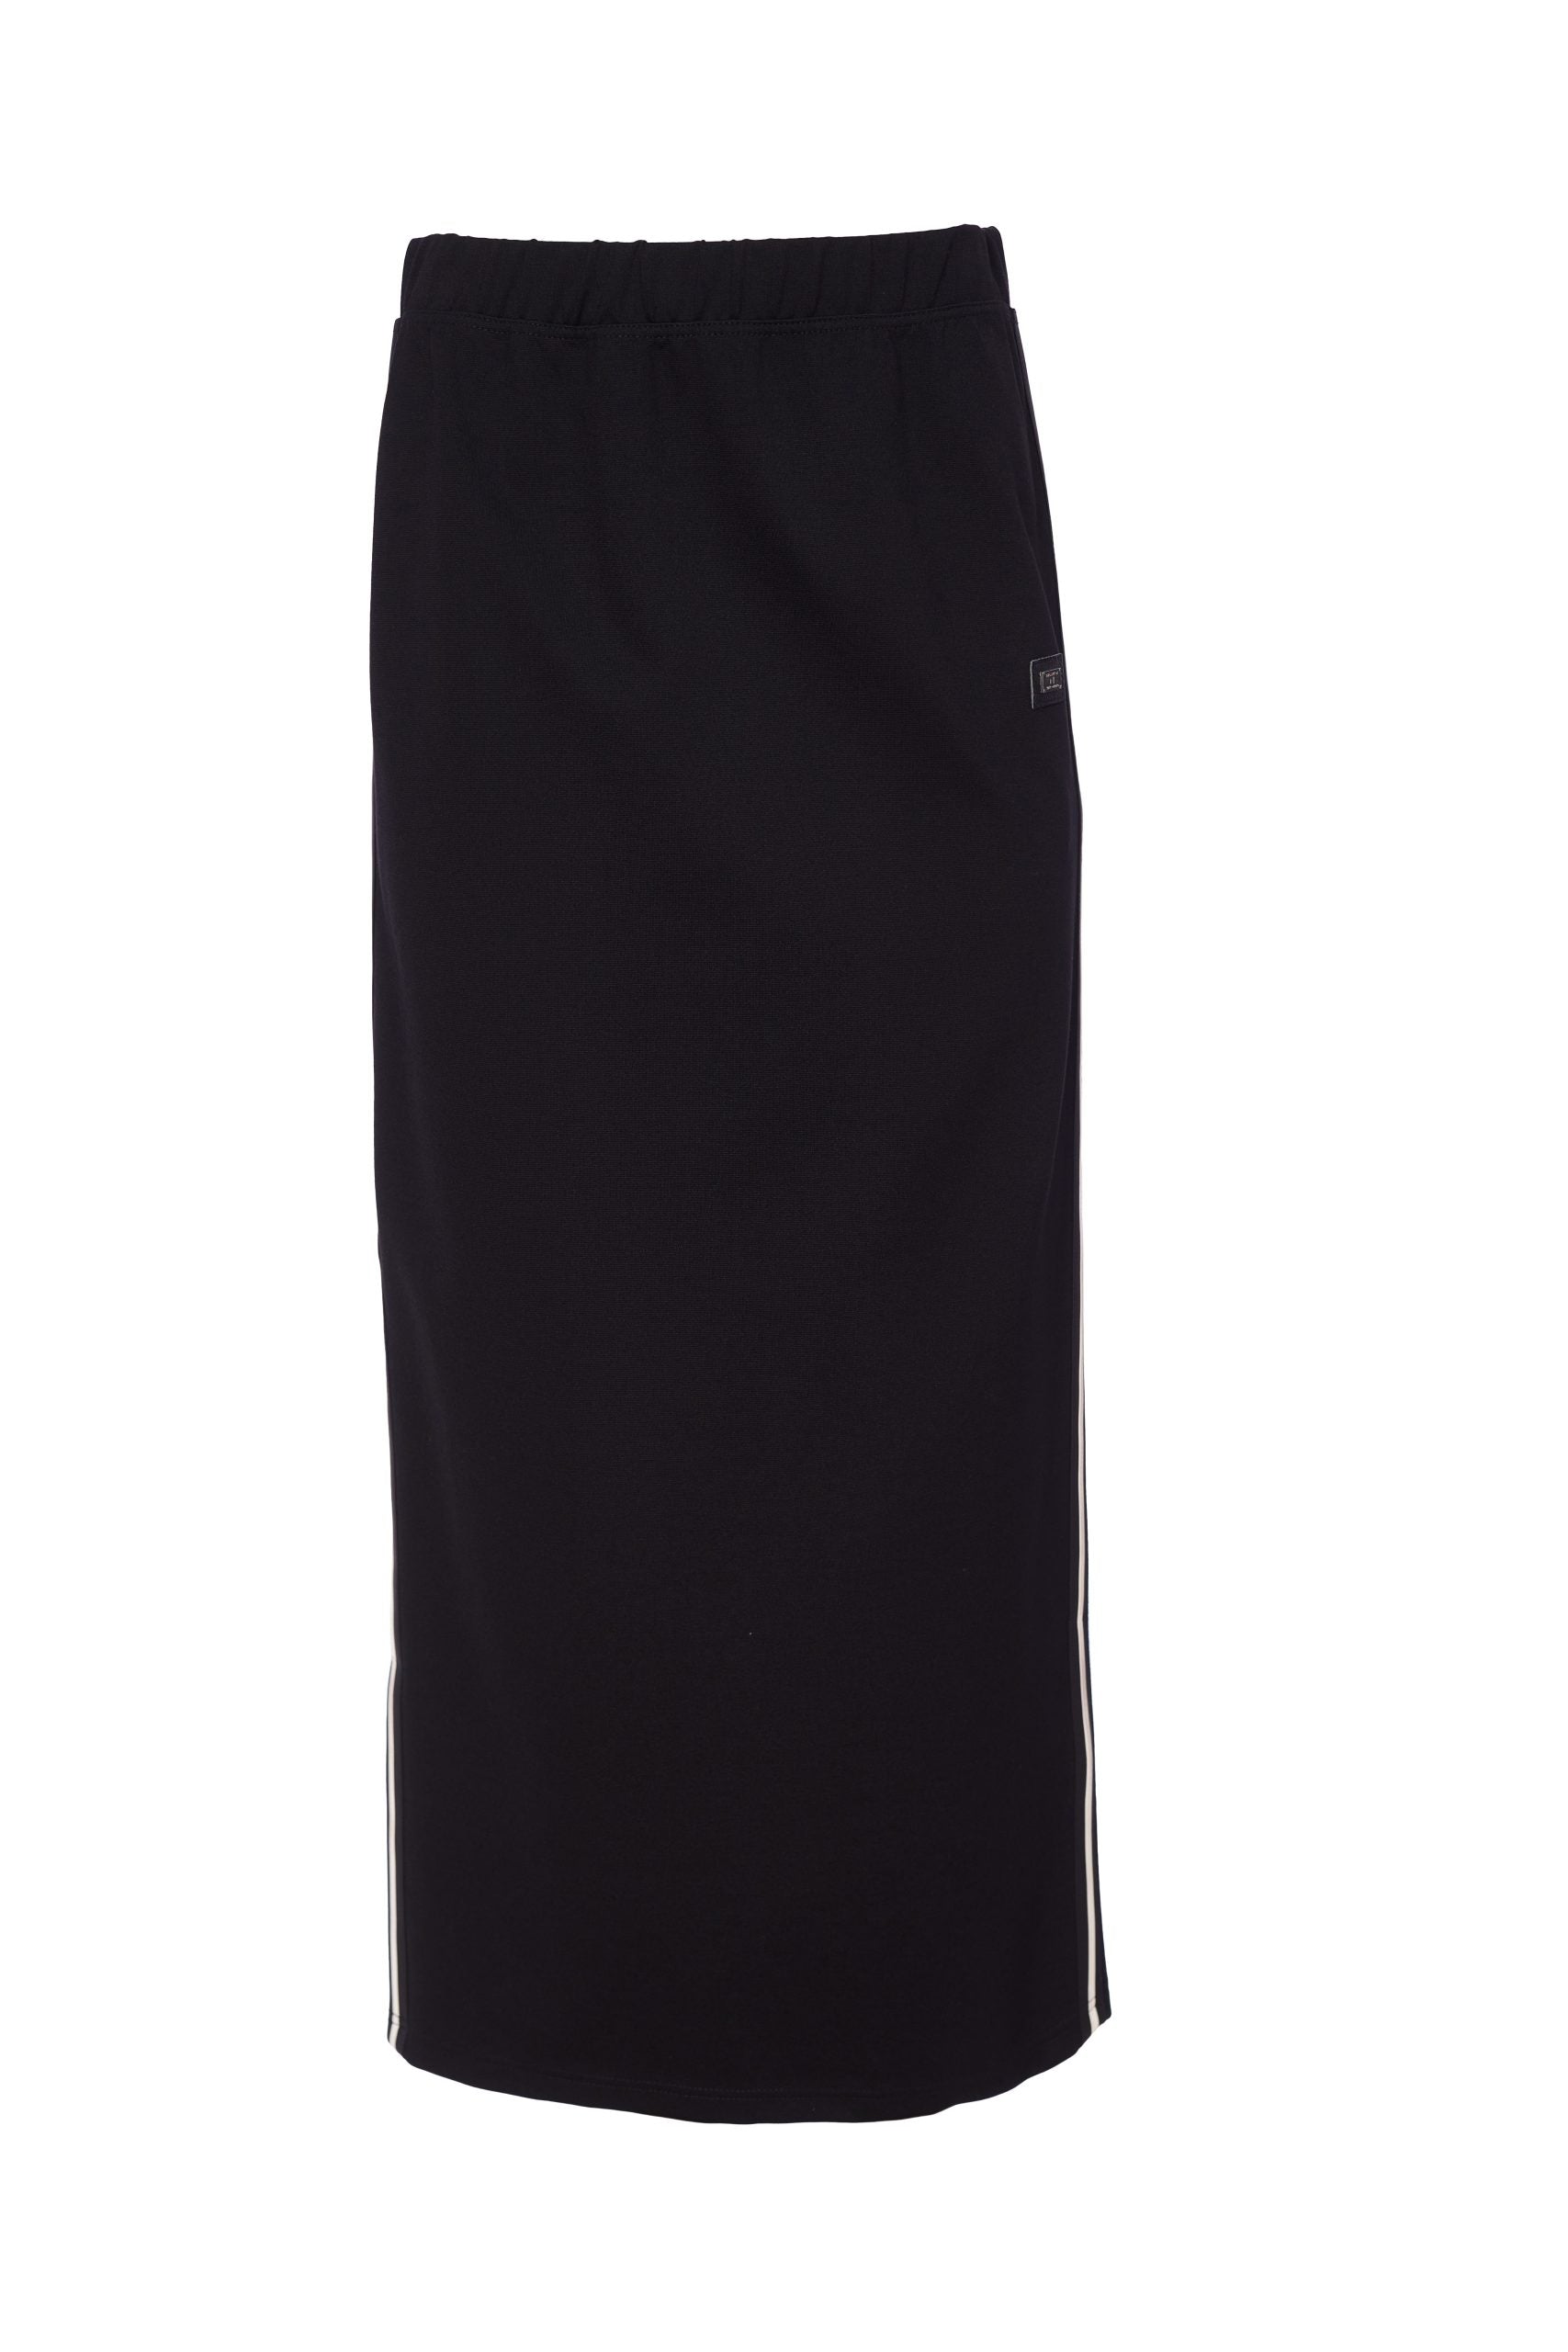 Straight Skirt with Trim in Black/White